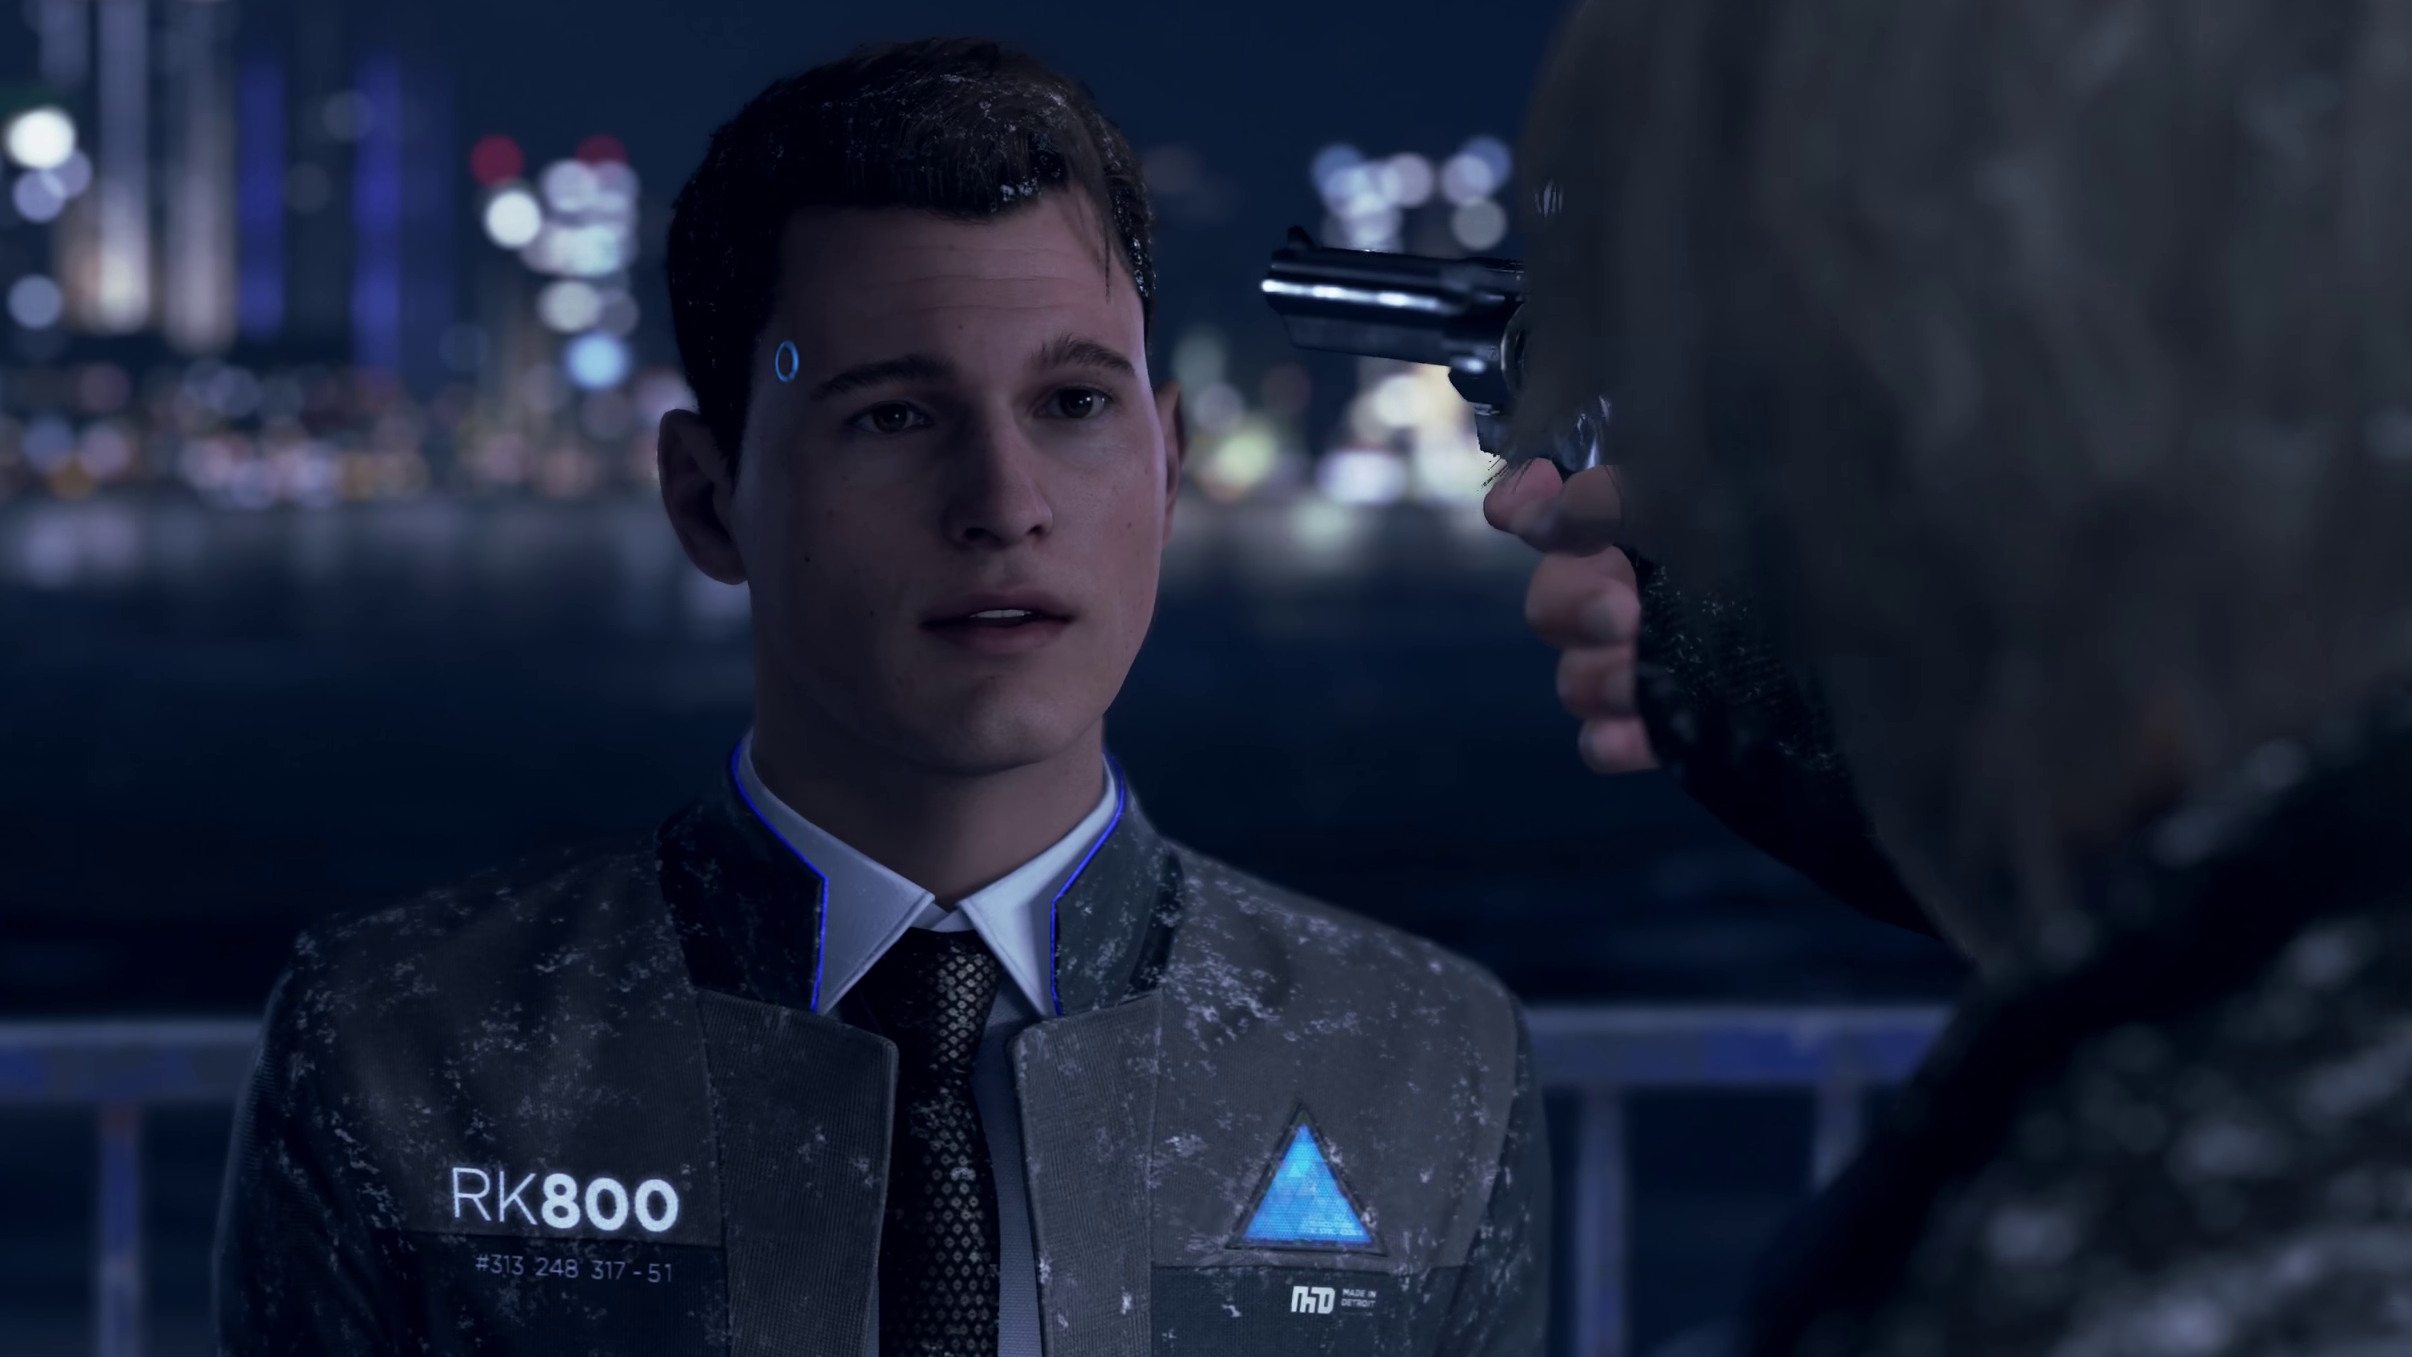 Detroit: Become Human review - clumsy yet effective robot-rights